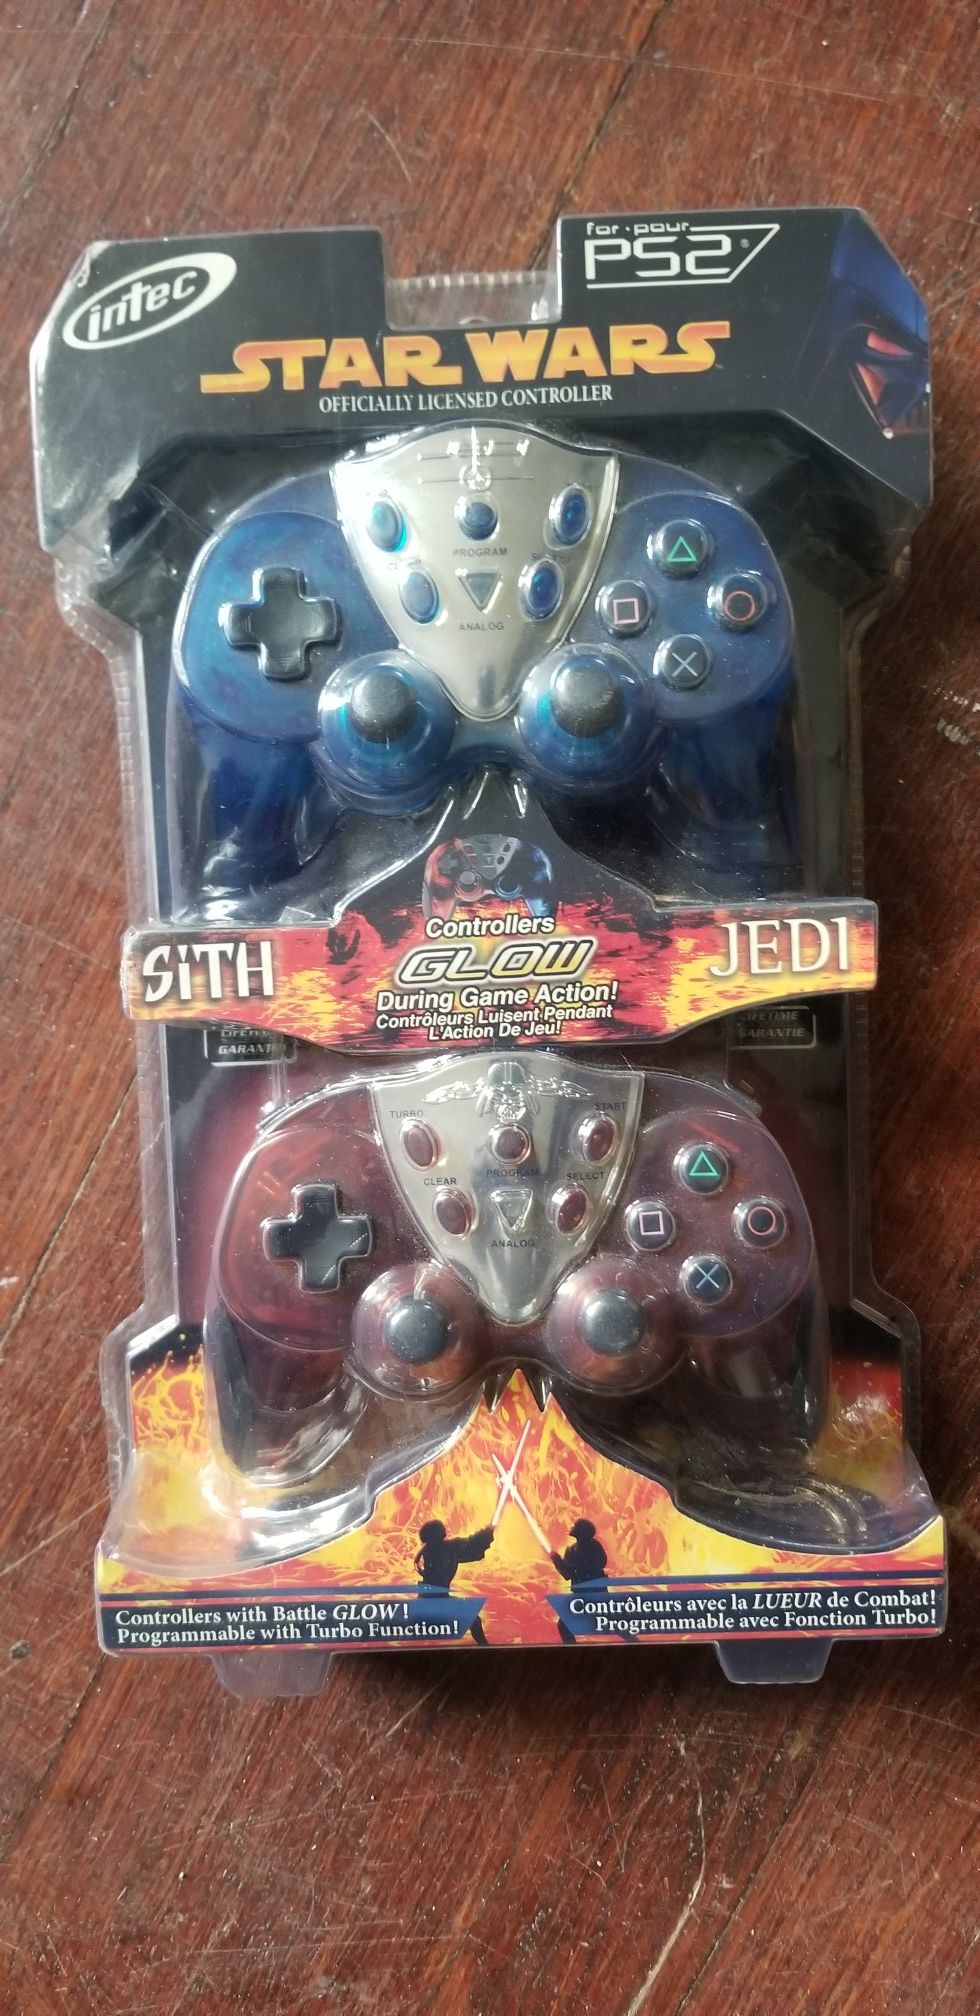 Star wars ps2 controller's